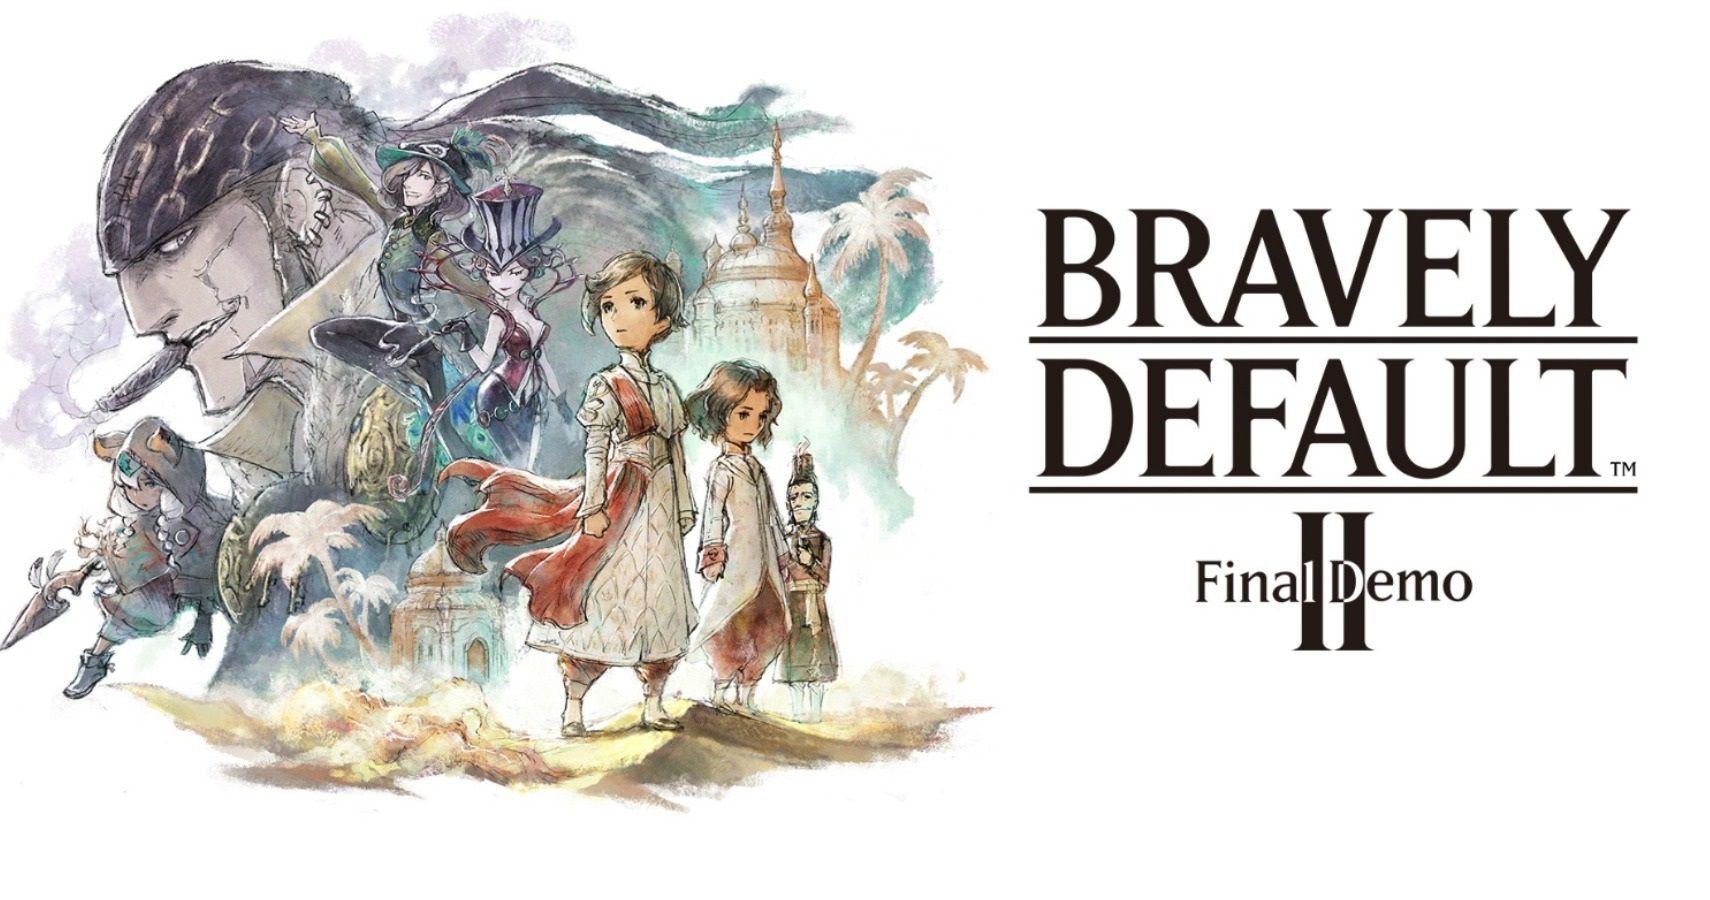 Bravely Default II New Demo Cover